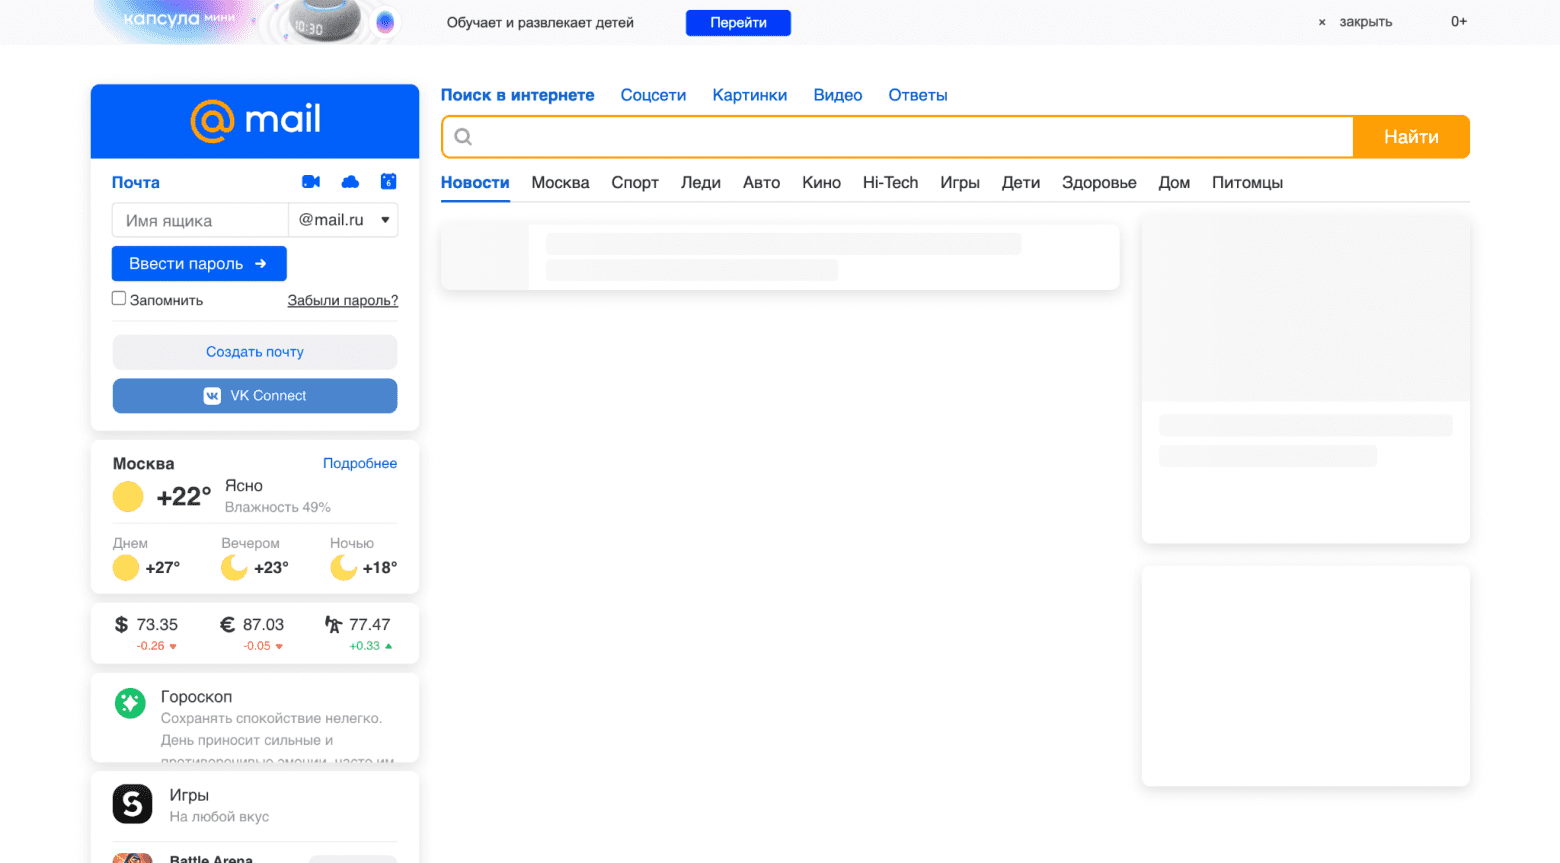 Active JavaScript just shows an empty page in the news section, hidding the layout jumps.